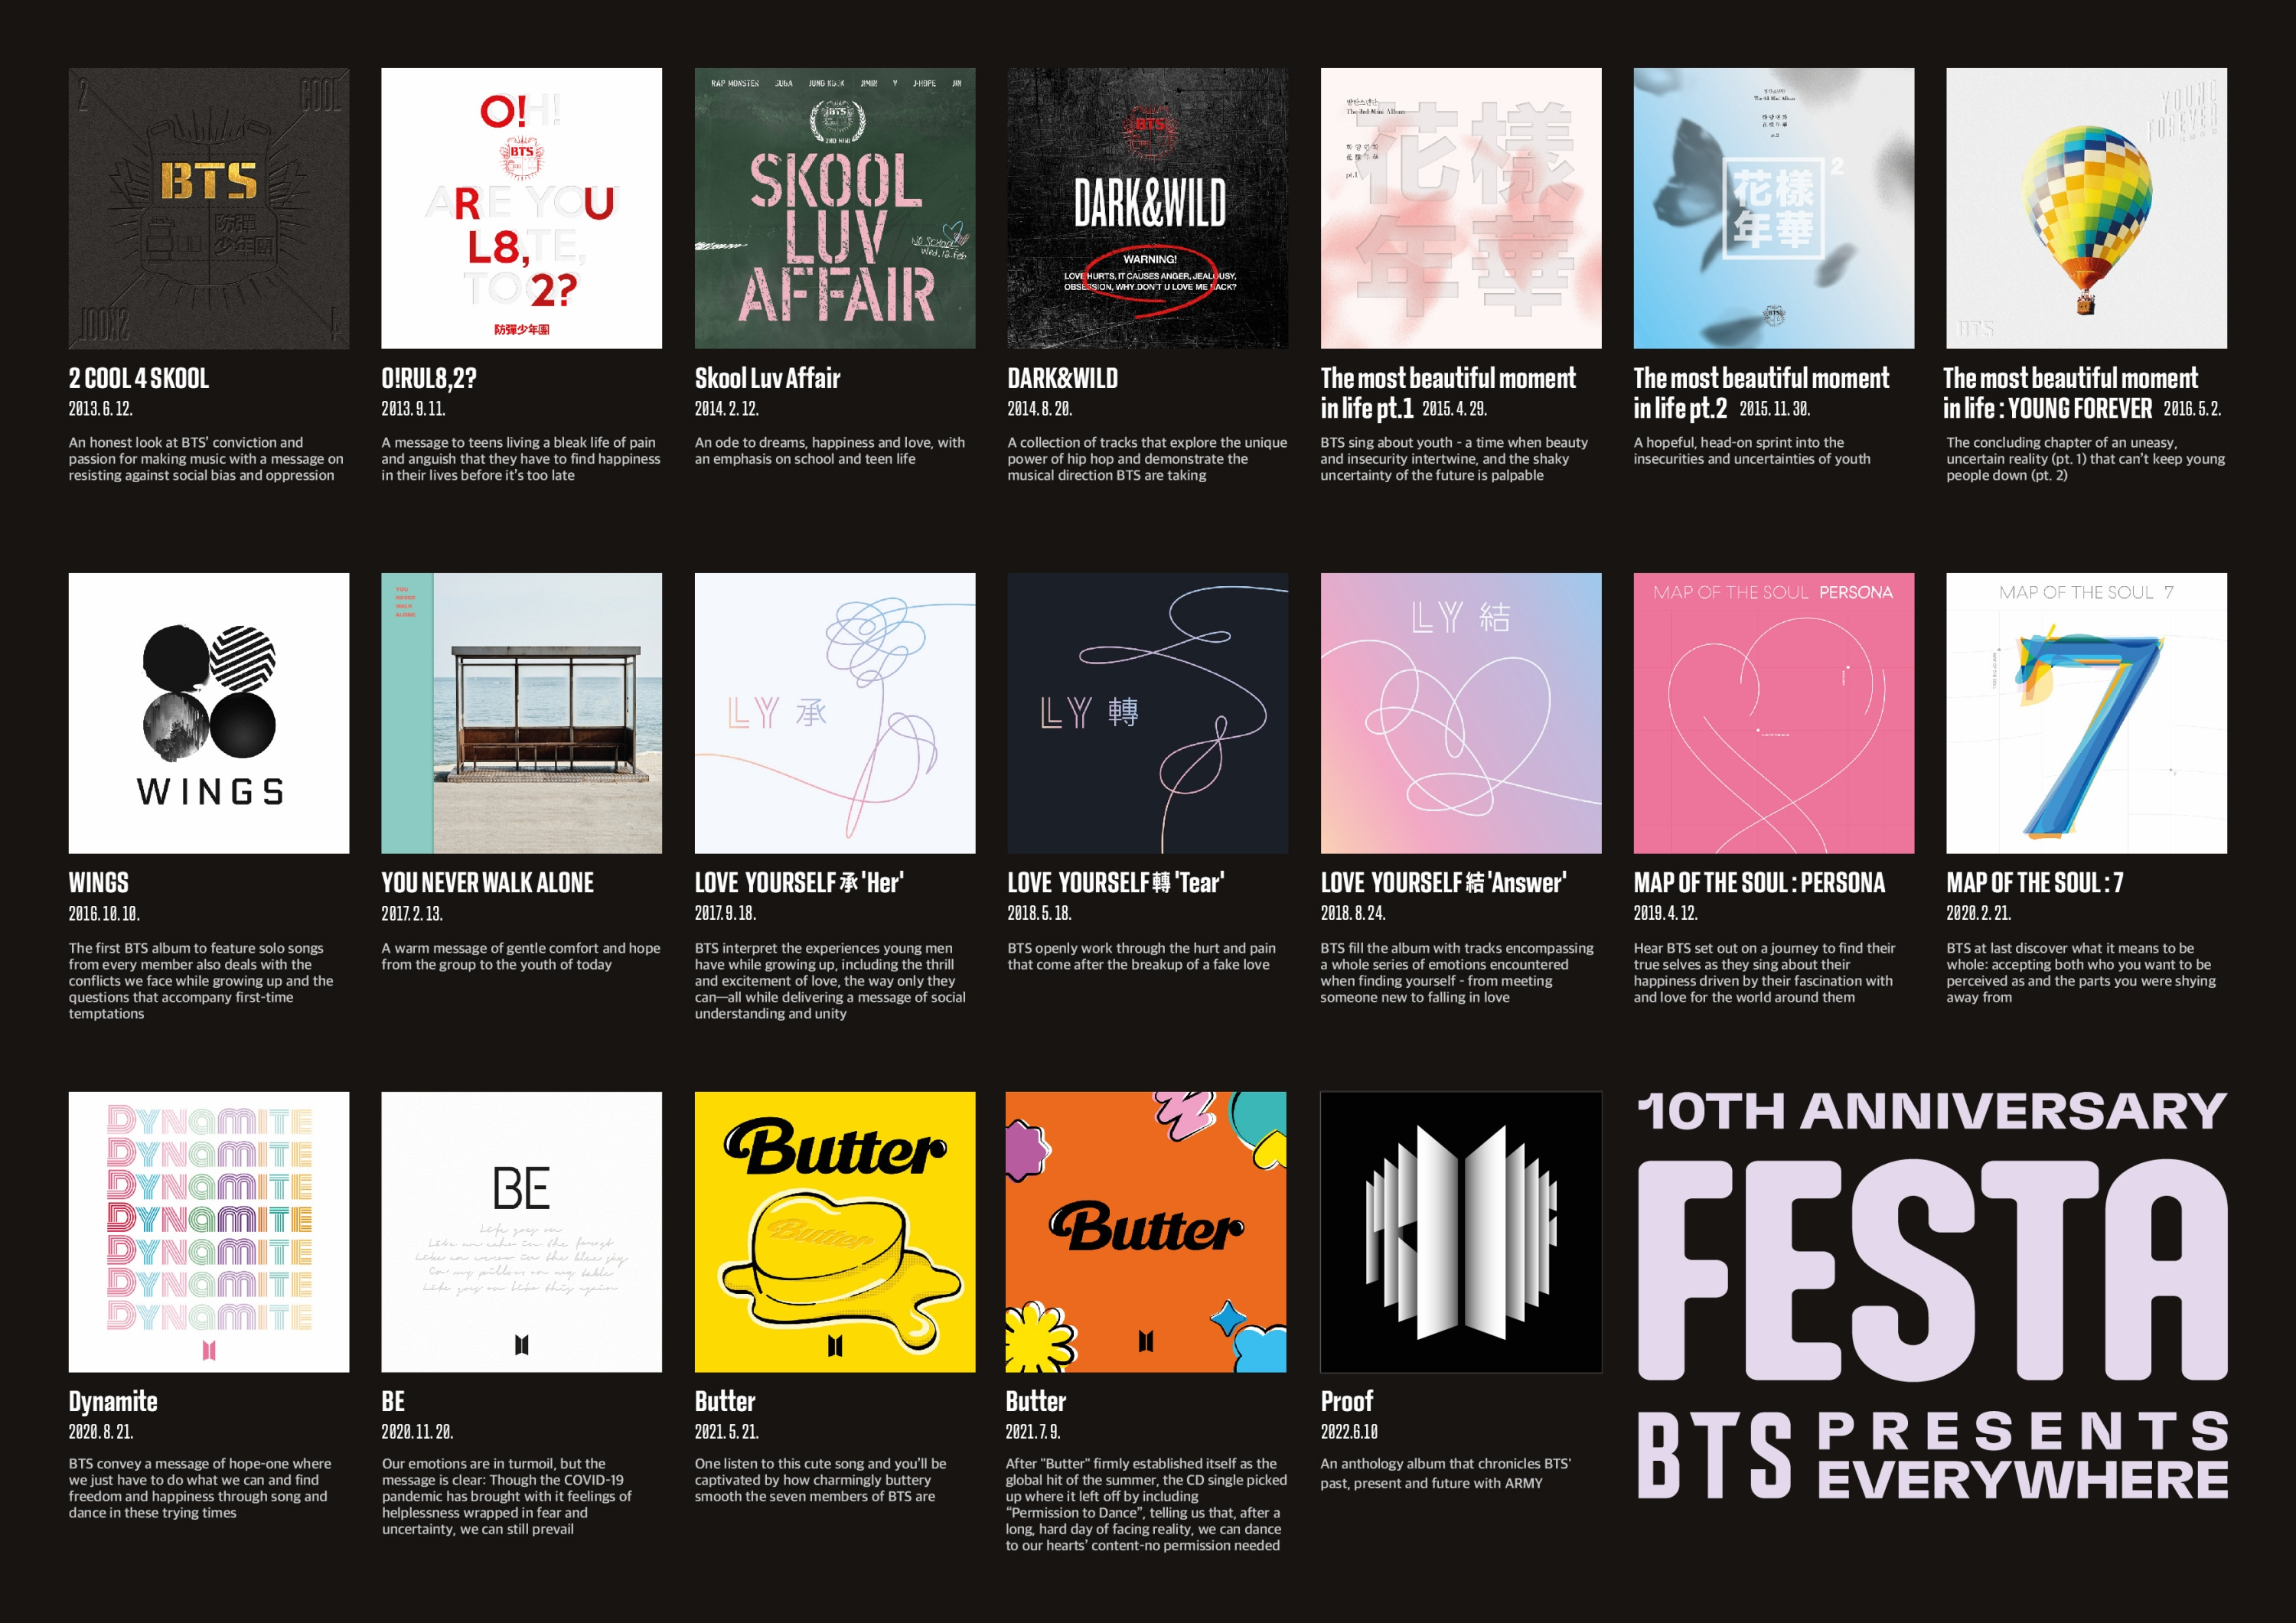 BTS album poster for 10th anniversary Festa BTS Presents Everywhere. Features images of 19 BTS albums, with brief bios of each one.